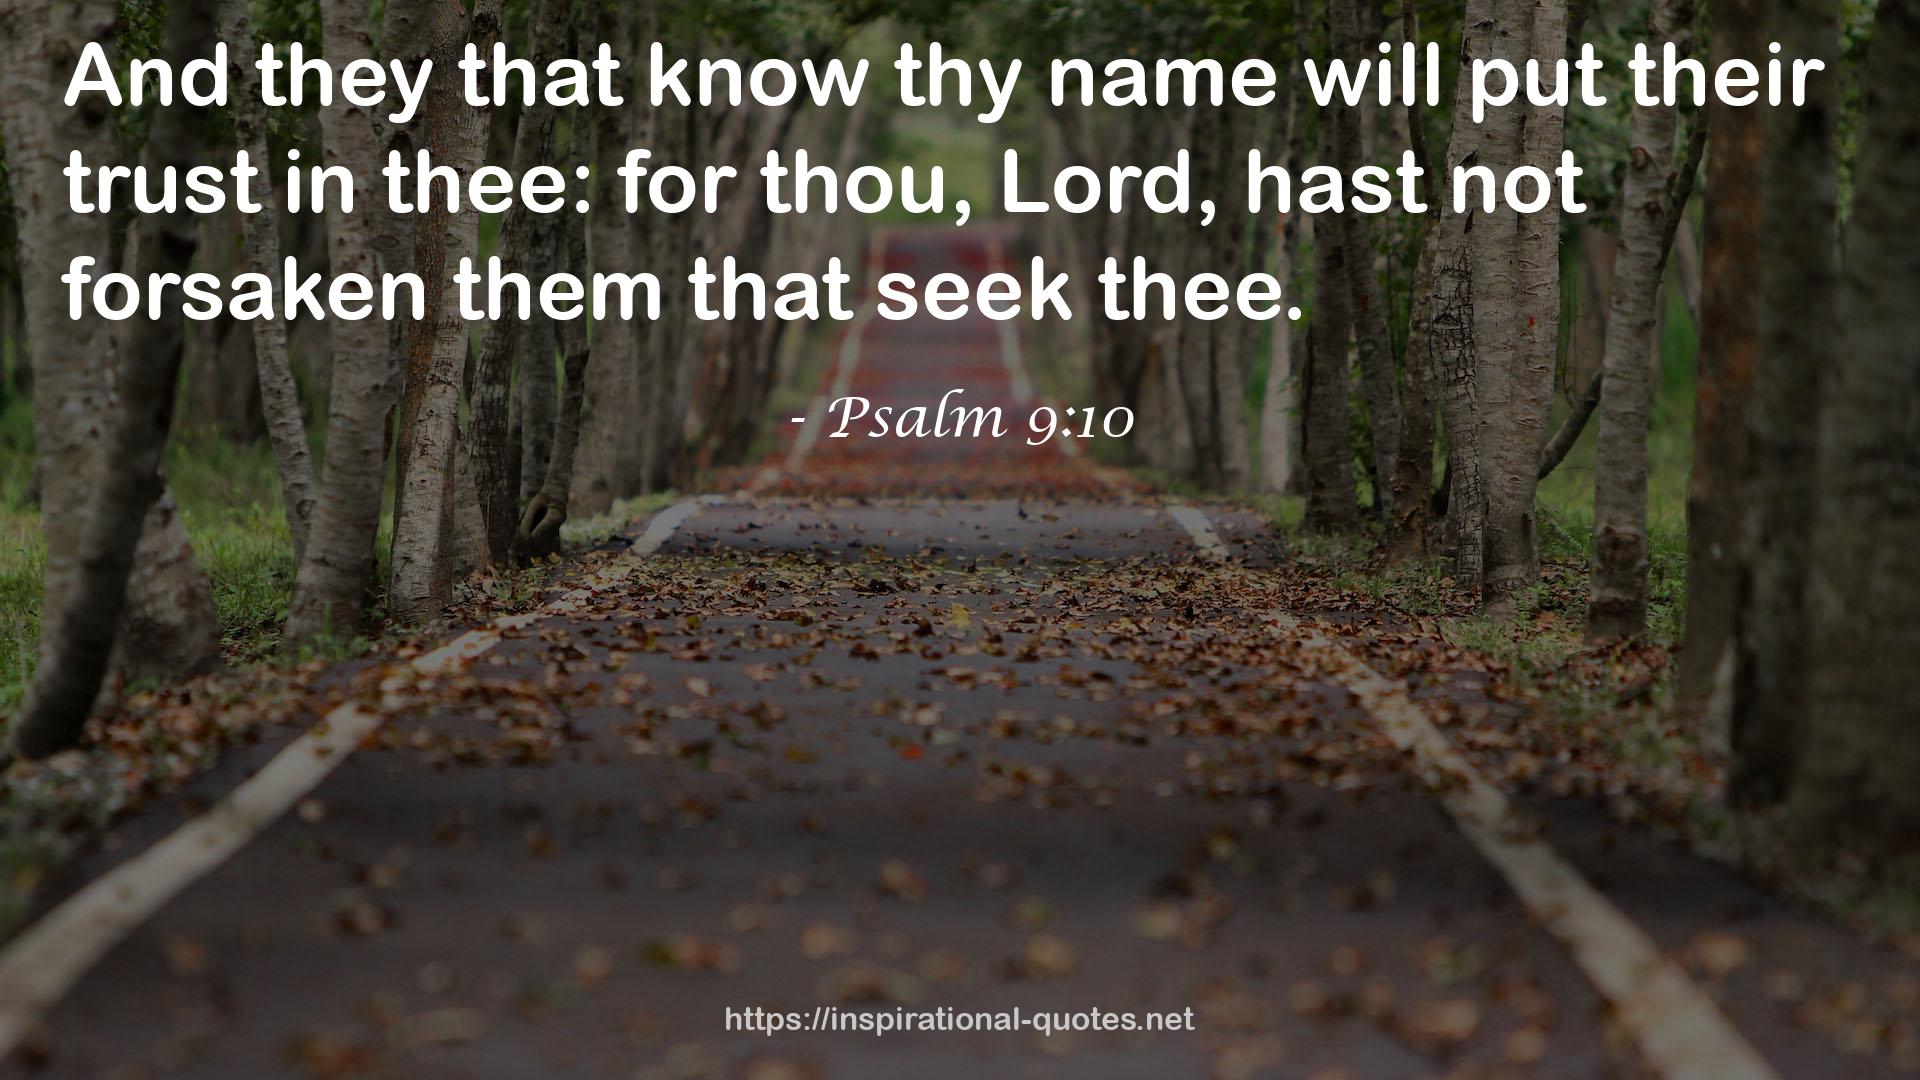 Psalm 9:10 QUOTES